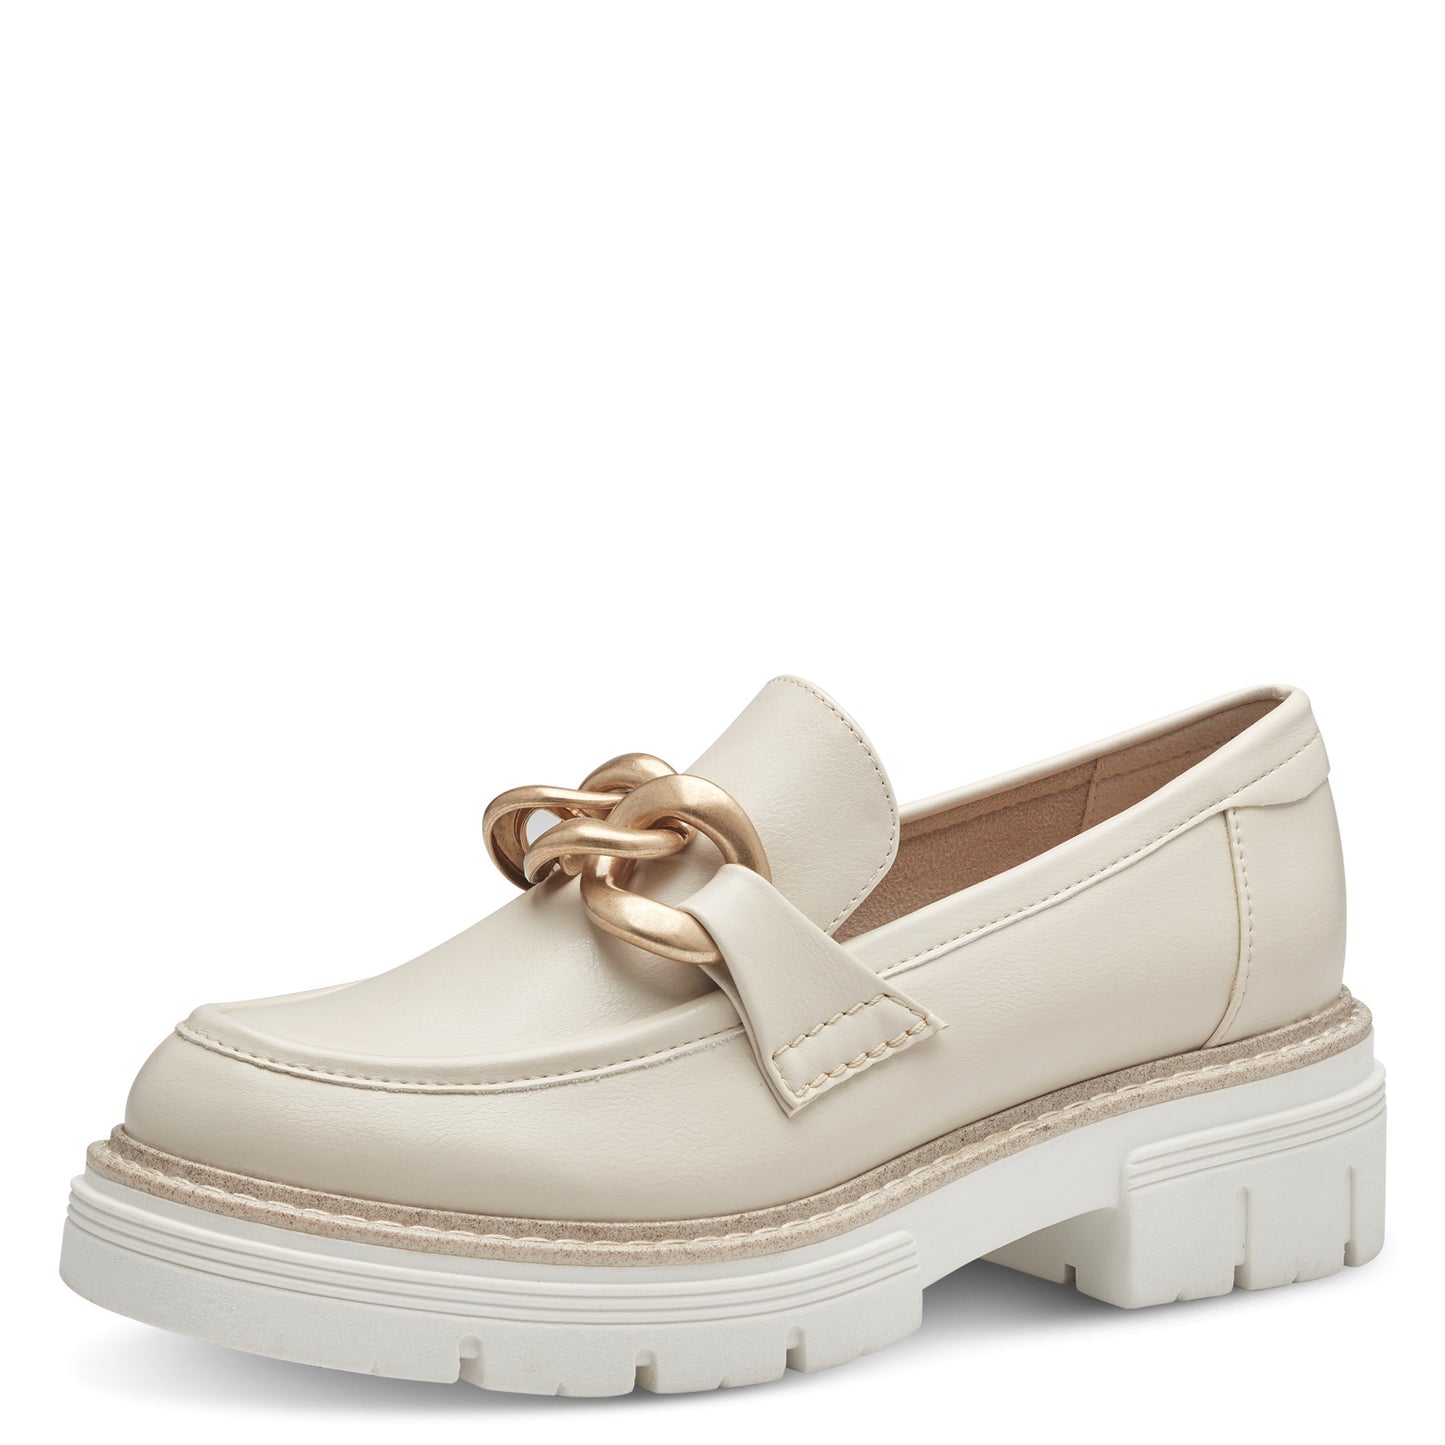 Marco Tozzi - Ladies Shoes Loafers Cream & Gold (1862)